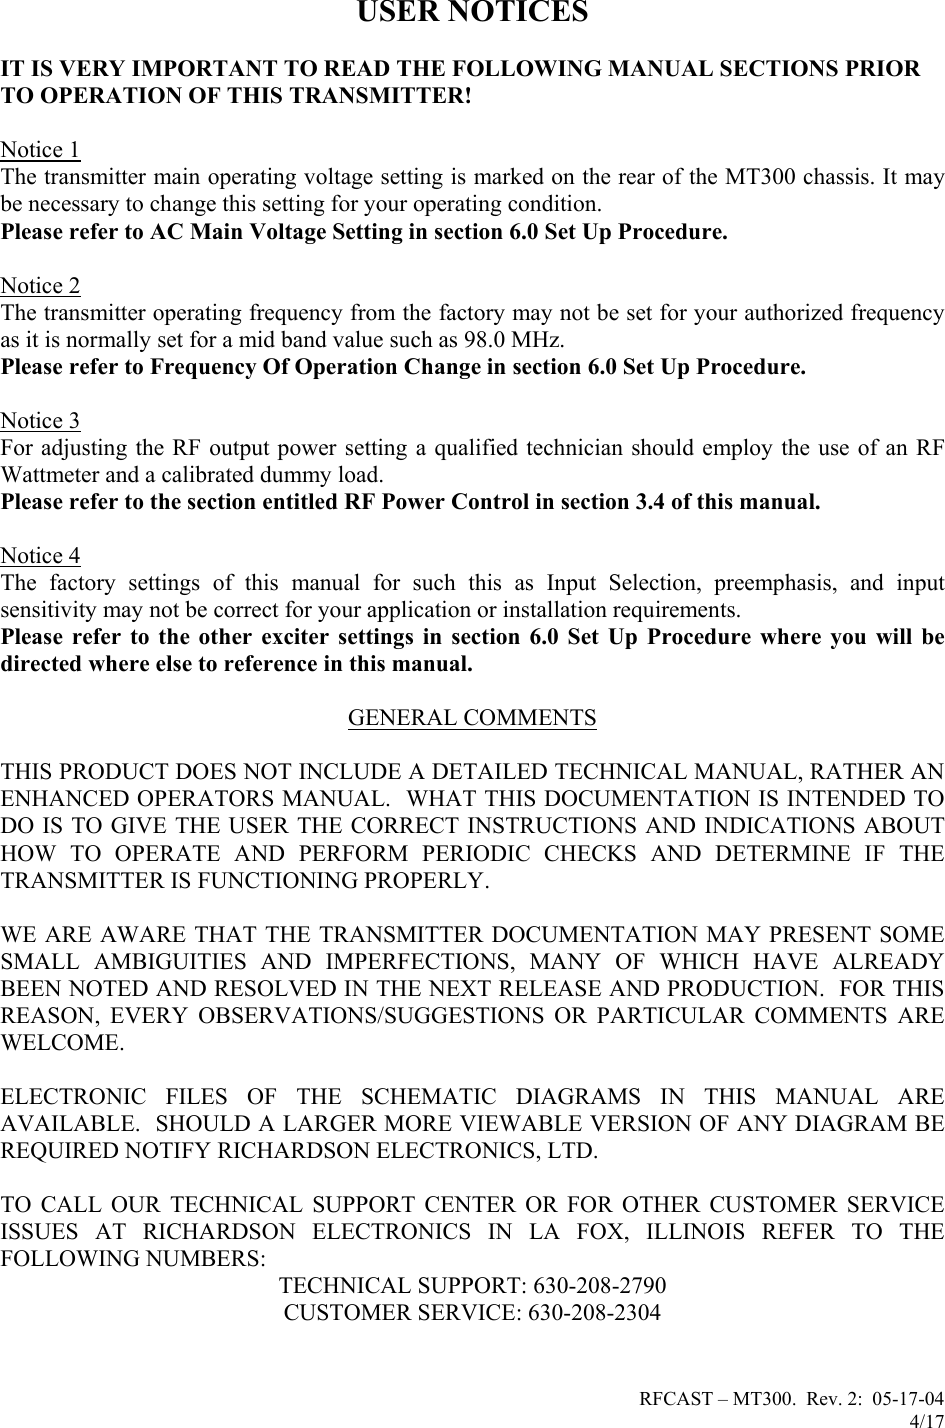 RFCAST – MT300.  Rev. 2:  05-17-04                       4/17                       USER NOTICES  IT IS VERY IMPORTANT TO READ THE FOLLOWING MANUAL SECTIONS PRIOR TO OPERATION OF THIS TRANSMITTER!  Notice 1 The transmitter main operating voltage setting is marked on the rear of the MT300 chassis. It may be necessary to change this setting for your operating condition.   Please refer to AC Main Voltage Setting in section 6.0 Set Up Procedure.  Notice 2 The transmitter operating frequency from the factory may not be set for your authorized frequency as it is normally set for a mid band value such as 98.0 MHz. Please refer to Frequency Of Operation Change in section 6.0 Set Up Procedure.  Notice 3 For adjusting the RF output power setting a qualified technician should employ the use of an RF Wattmeter and a calibrated dummy load. Please refer to the section entitled RF Power Control in section 3.4 of this manual.  Notice 4 The factory settings of this manual for such this as Input Selection, preemphasis, and input sensitivity may not be correct for your application or installation requirements. Please refer to the other exciter settings in section 6.0 Set Up Procedure where you will be directed where else to reference in this manual.  GENERAL COMMENTS  THIS PRODUCT DOES NOT INCLUDE A DETAILED TECHNICAL MANUAL, RATHER AN ENHANCED OPERATORS MANUAL.  WHAT THIS DOCUMENTATION IS INTENDED TO DO IS TO GIVE THE USER THE CORRECT INSTRUCTIONS AND INDICATIONS ABOUT HOW TO OPERATE AND PERFORM PERIODIC CHECKS AND DETERMINE IF THE TRANSMITTER IS FUNCTIONING PROPERLY.   WE ARE AWARE THAT THE TRANSMITTER DOCUMENTATION MAY PRESENT SOME SMALL AMBIGUITIES AND IMPERFECTIONS, MANY OF WHICH HAVE ALREADY BEEN NOTED AND RESOLVED IN THE NEXT RELEASE AND PRODUCTION.  FOR THIS REASON, EVERY OBSERVATIONS/SUGGESTIONS OR PARTICULAR COMMENTS ARE WELCOME.  ELECTRONIC FILES OF THE SCHEMATIC DIAGRAMS IN THIS MANUAL ARE AVAILABLE.  SHOULD A LARGER MORE VIEWABLE VERSION OF ANY DIAGRAM BE REQUIRED NOTIFY RICHARDSON ELECTRONICS, LTD.  TO CALL OUR TECHNICAL SUPPORT CENTER OR FOR OTHER CUSTOMER SERVICE ISSUES AT RICHARDSON ELECTRONICS IN LA FOX, ILLINOIS REFER TO THE FOLLOWING NUMBERS: TECHNICAL SUPPORT: 630-208-2790 CUSTOMER SERVICE: 630-208-2304   